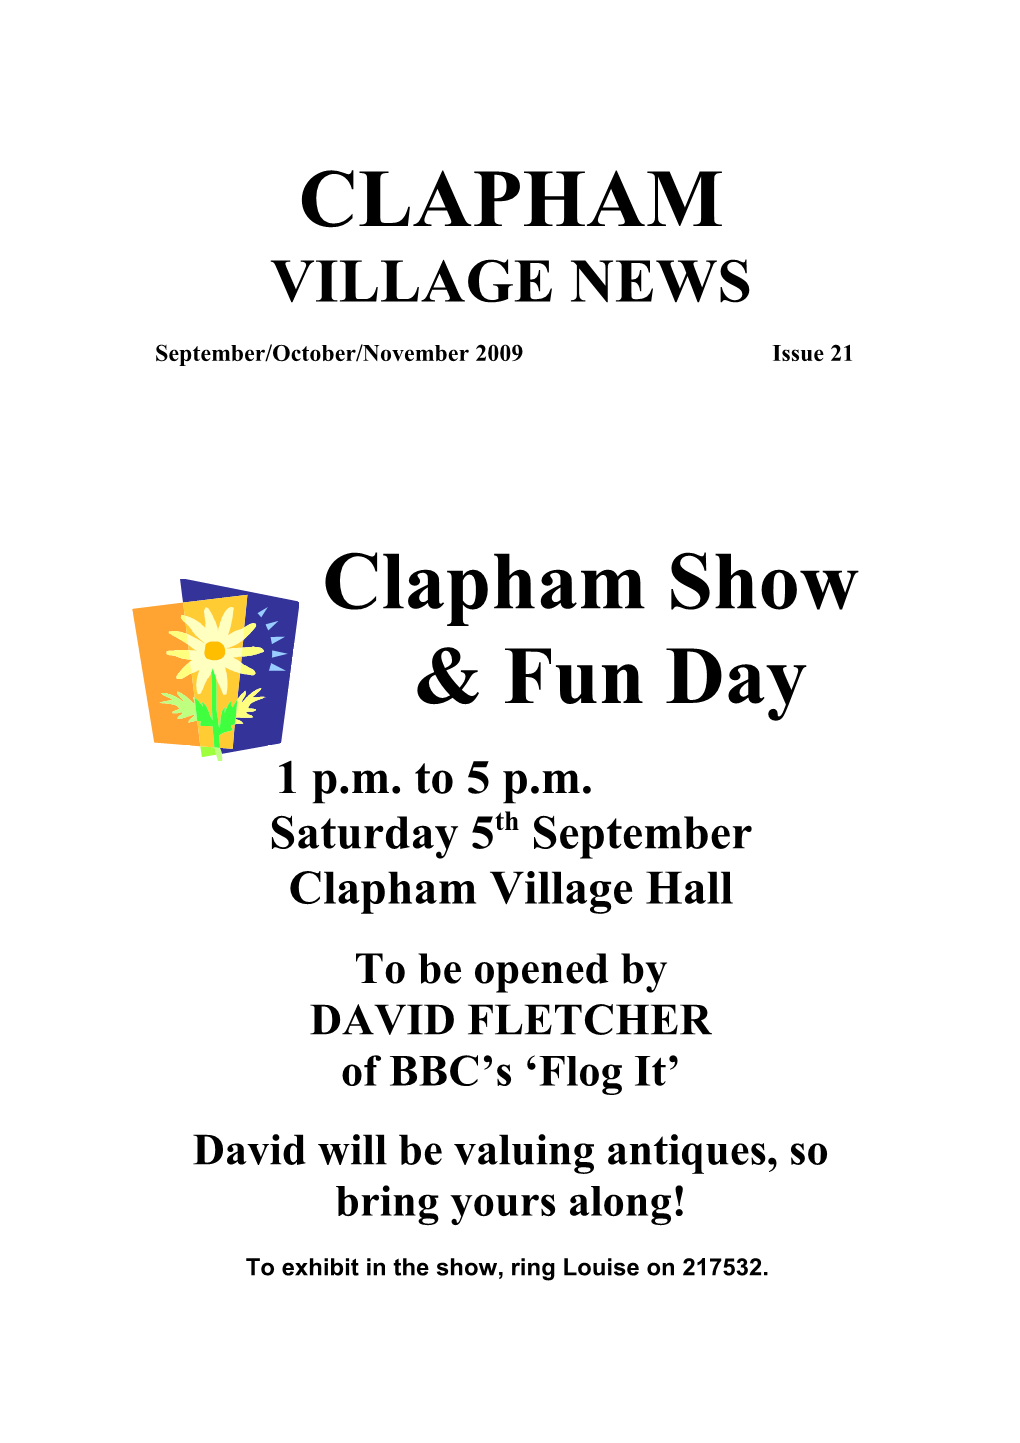 David Will Be Valuing Antiques, So Bring Yours Along!